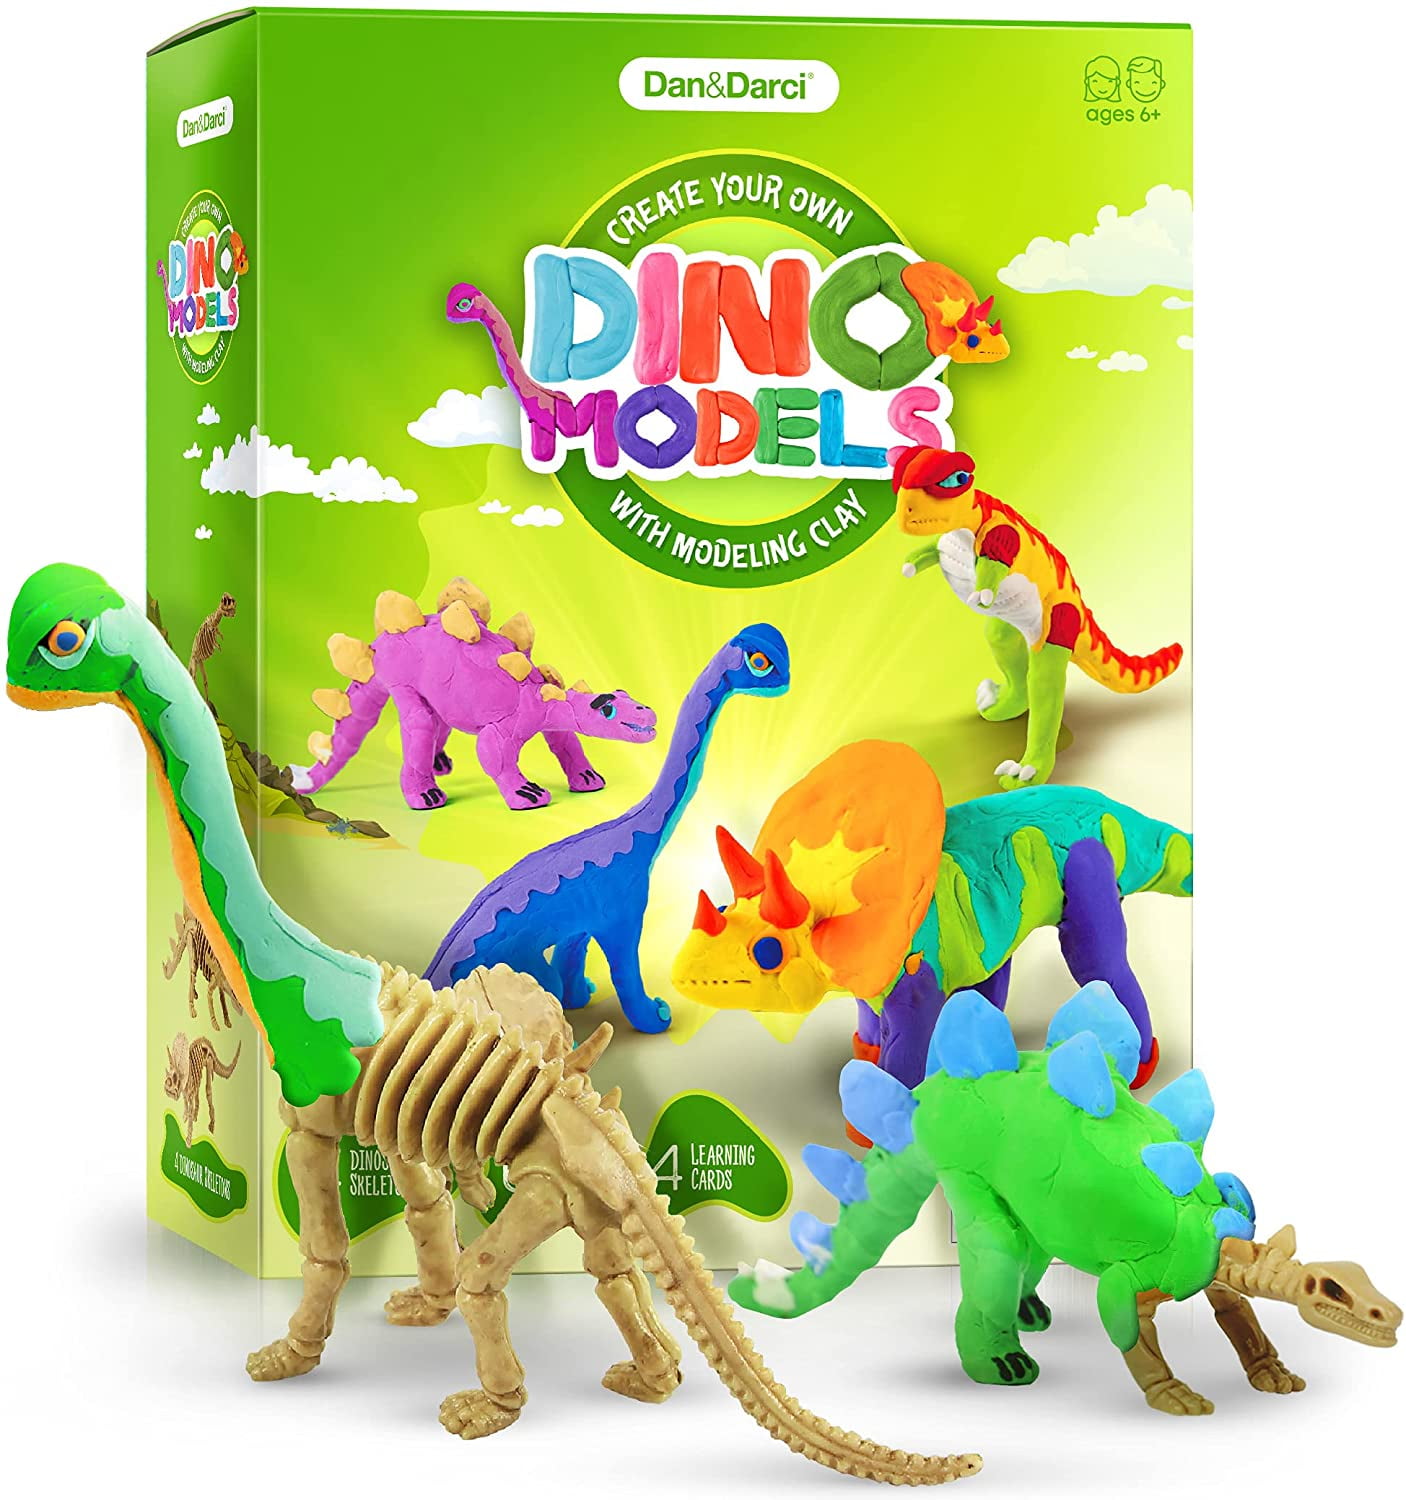 Dan&Darci Create Your Own Dino Models with Modeling Clay - Build a Dinosaur  Model with Air Dry Magic Clay - Animals & Dinosaur Gifts for Boys & Girls -  Arts & Crafts